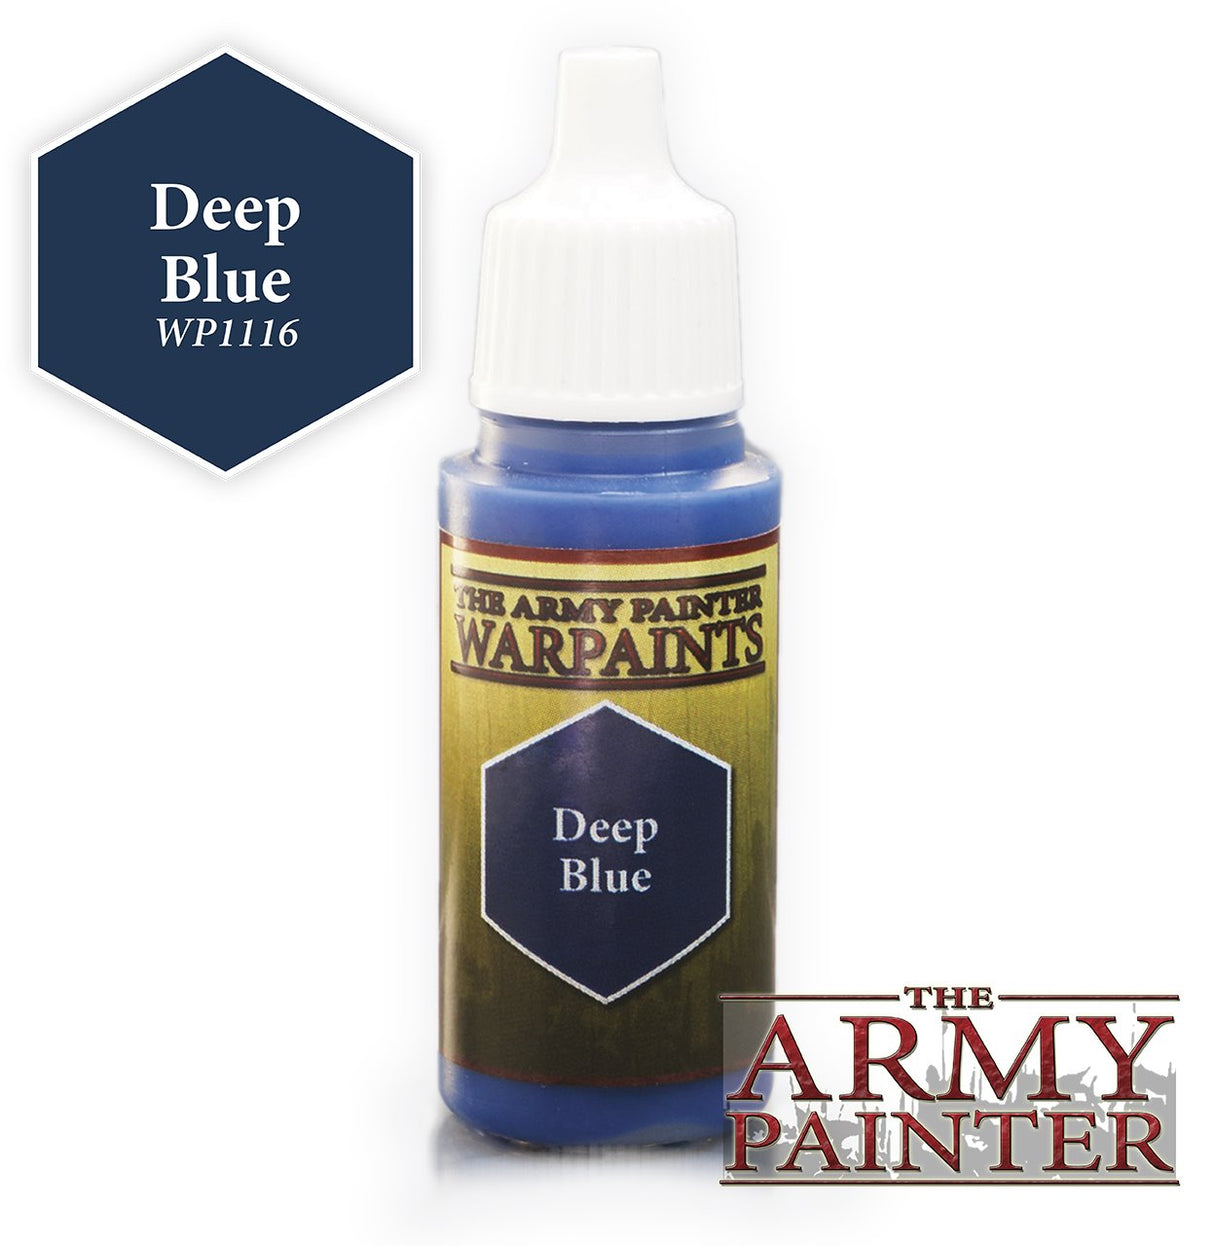 Army Painter WP1116 Deep Blue The Army Painter PAINT, BRUSHES & SUPPLIES